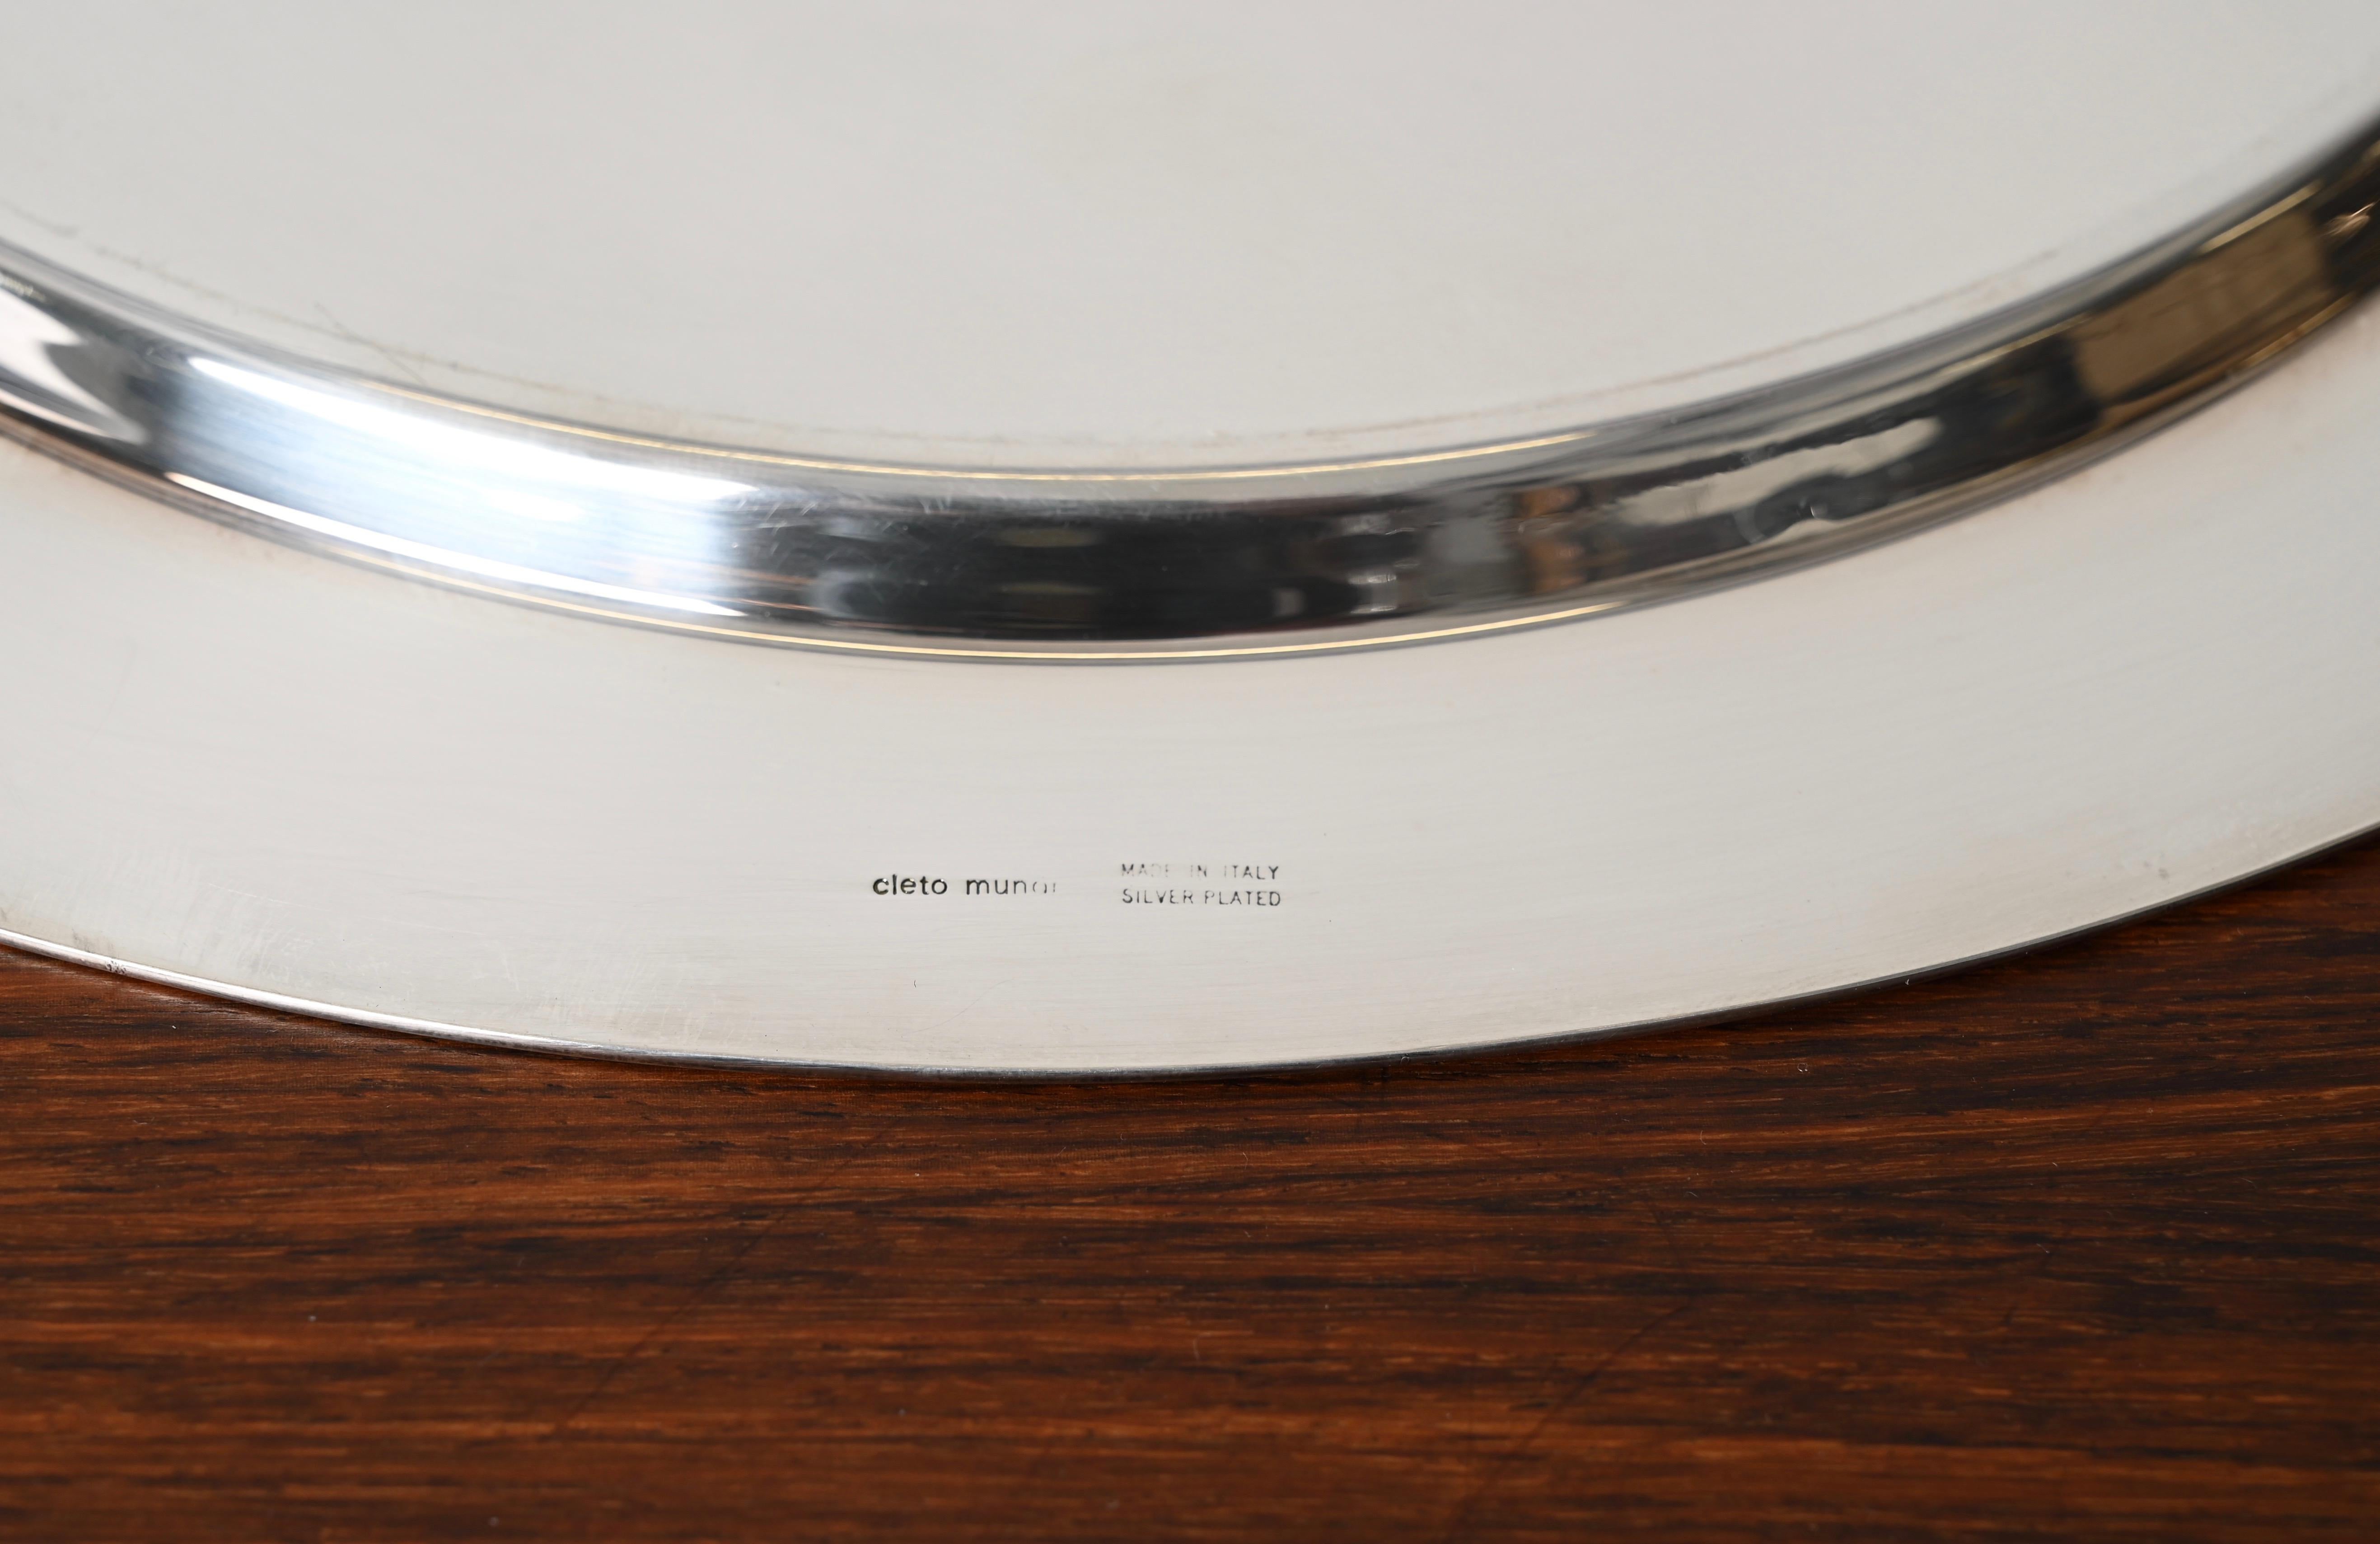 Gio Ponti for Cleto Munari Modernist Silver Plated Serving Plate Italy, 1980s For Sale 3